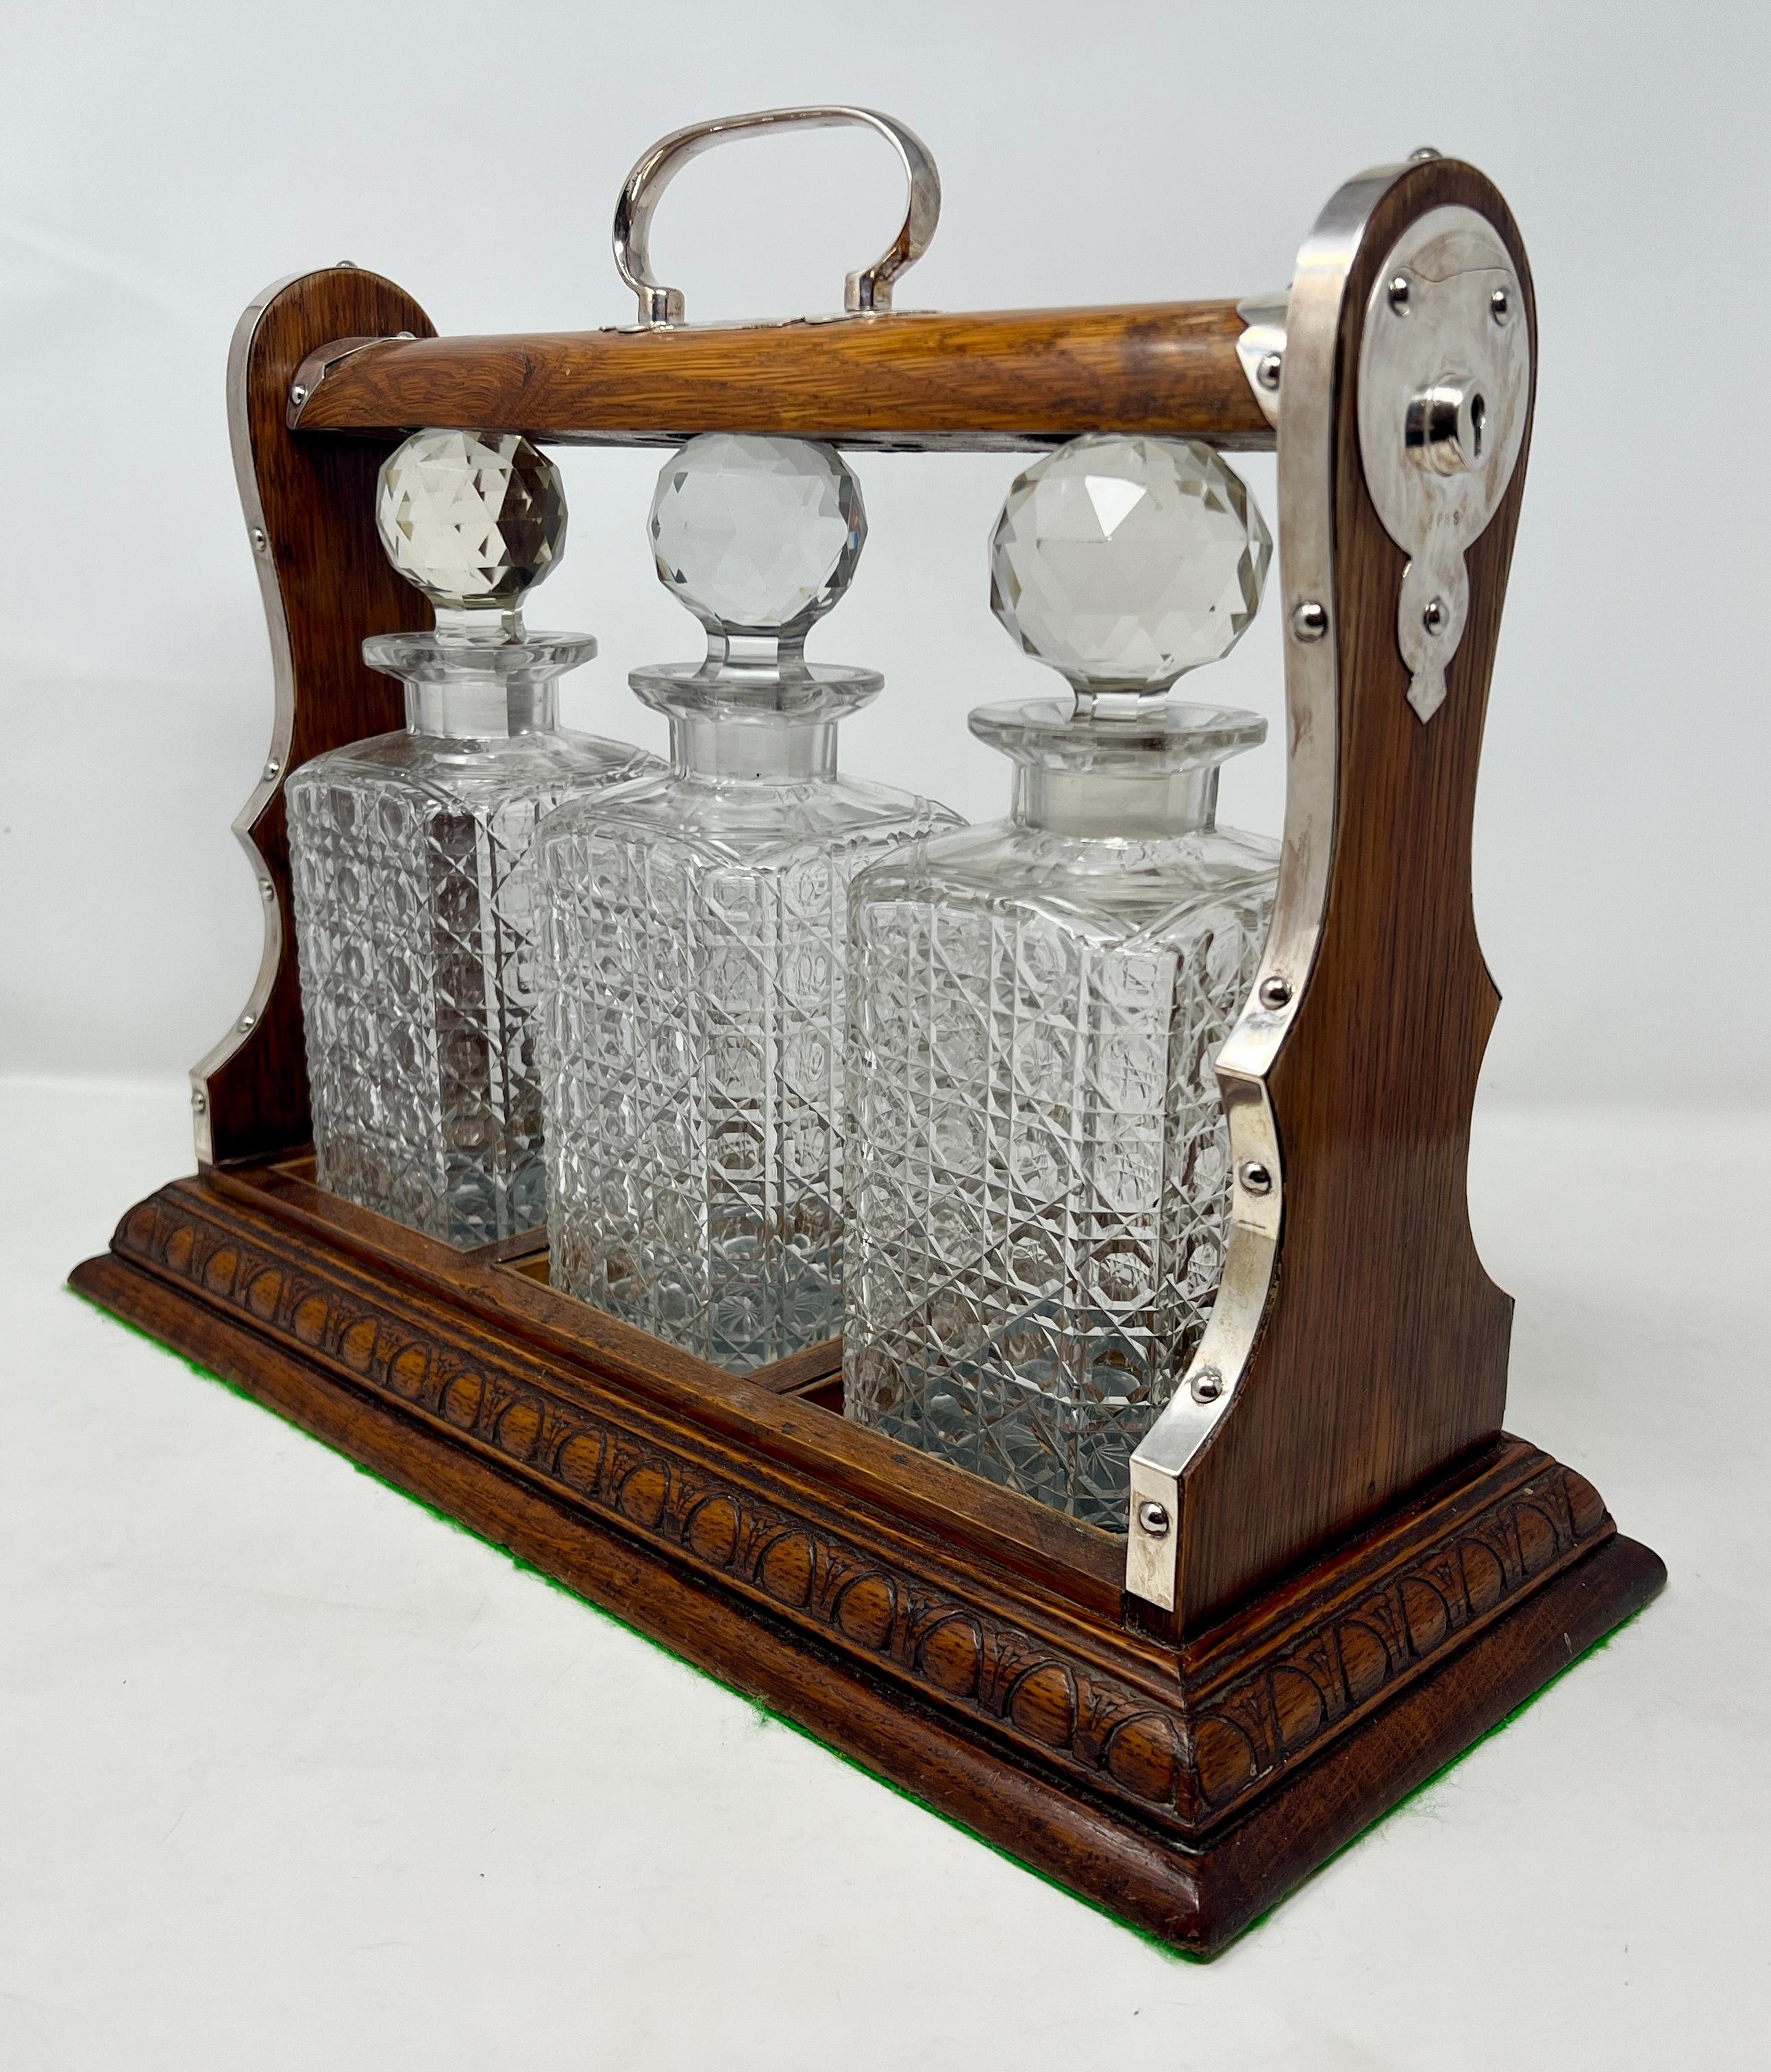 Antique English Golden Oak and Cut Crystal 3-Bottle Tantalus with Sheffield Silver Plated Mounts along with Lock and Working Key, Circa 1890.